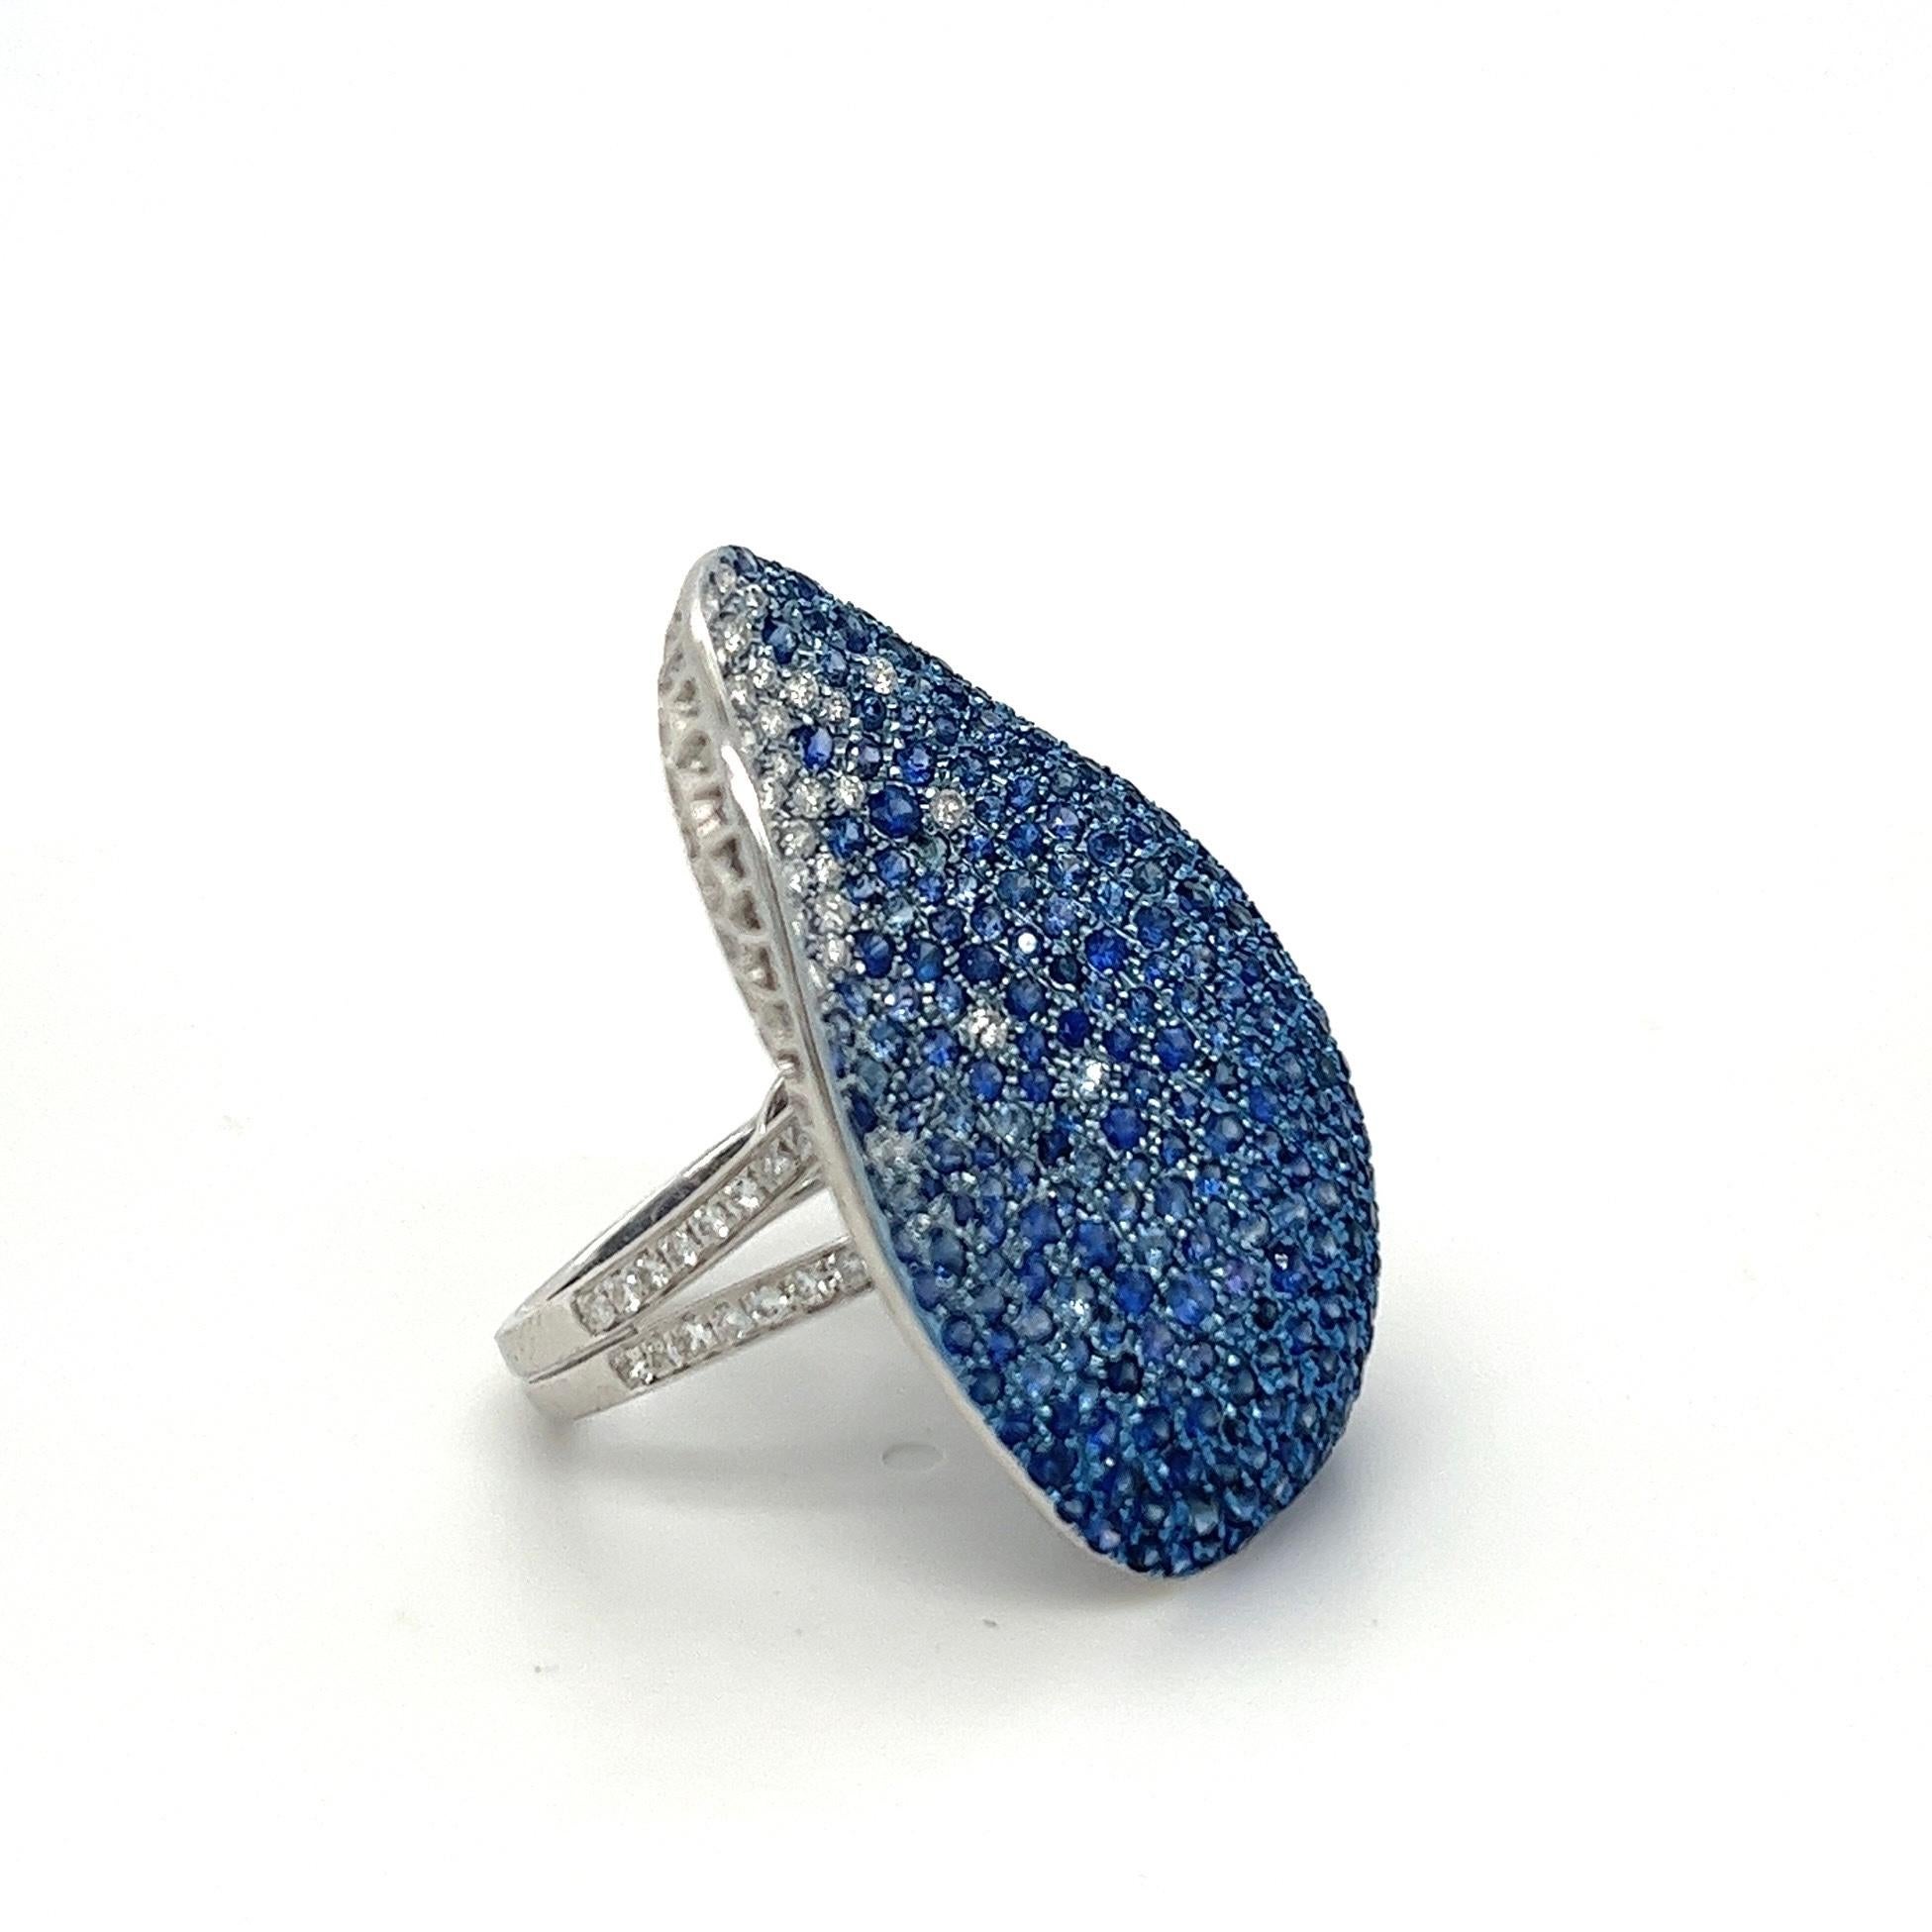 18K White Gold Ring with Diamonds & Blue Sapphires

340 Blue Sapphires - 4.08 CT
105 Diamonds - 0.92 CT
18K White - 8.86 CT

Introducing the Althoff Jewelry ring, a mesmerizing blend of blue sapphire and diamond, capturing the essence of leaves